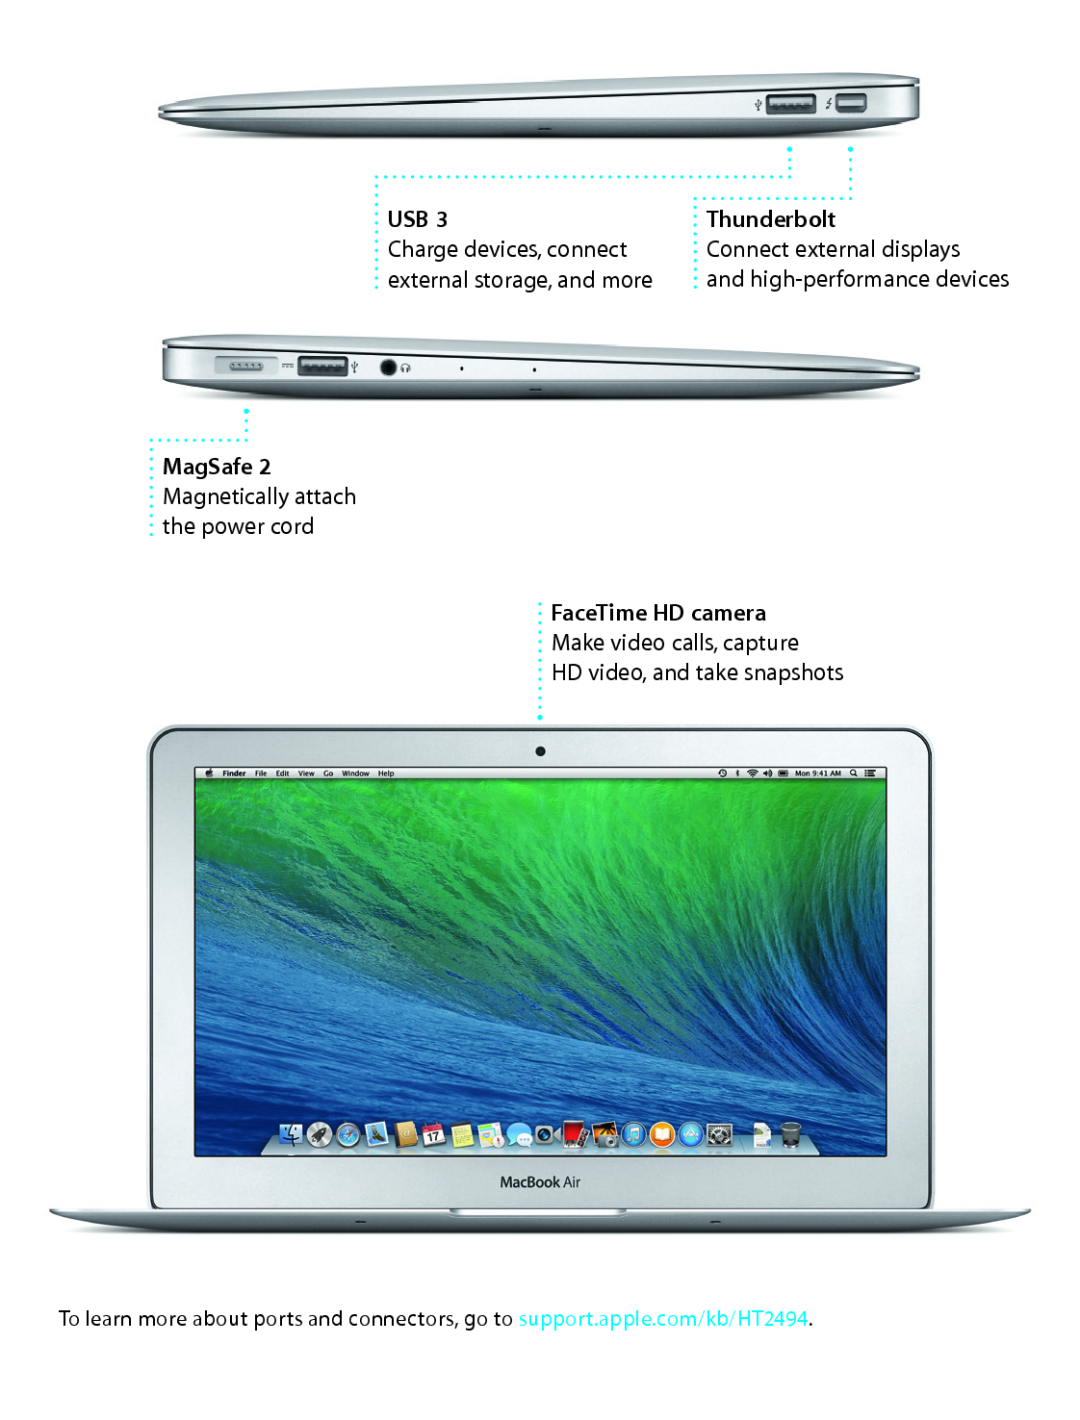 Apple MD711LL/A quick start Thunderbolt, Charge devices, connect, Connect external displays, external storage, and more 